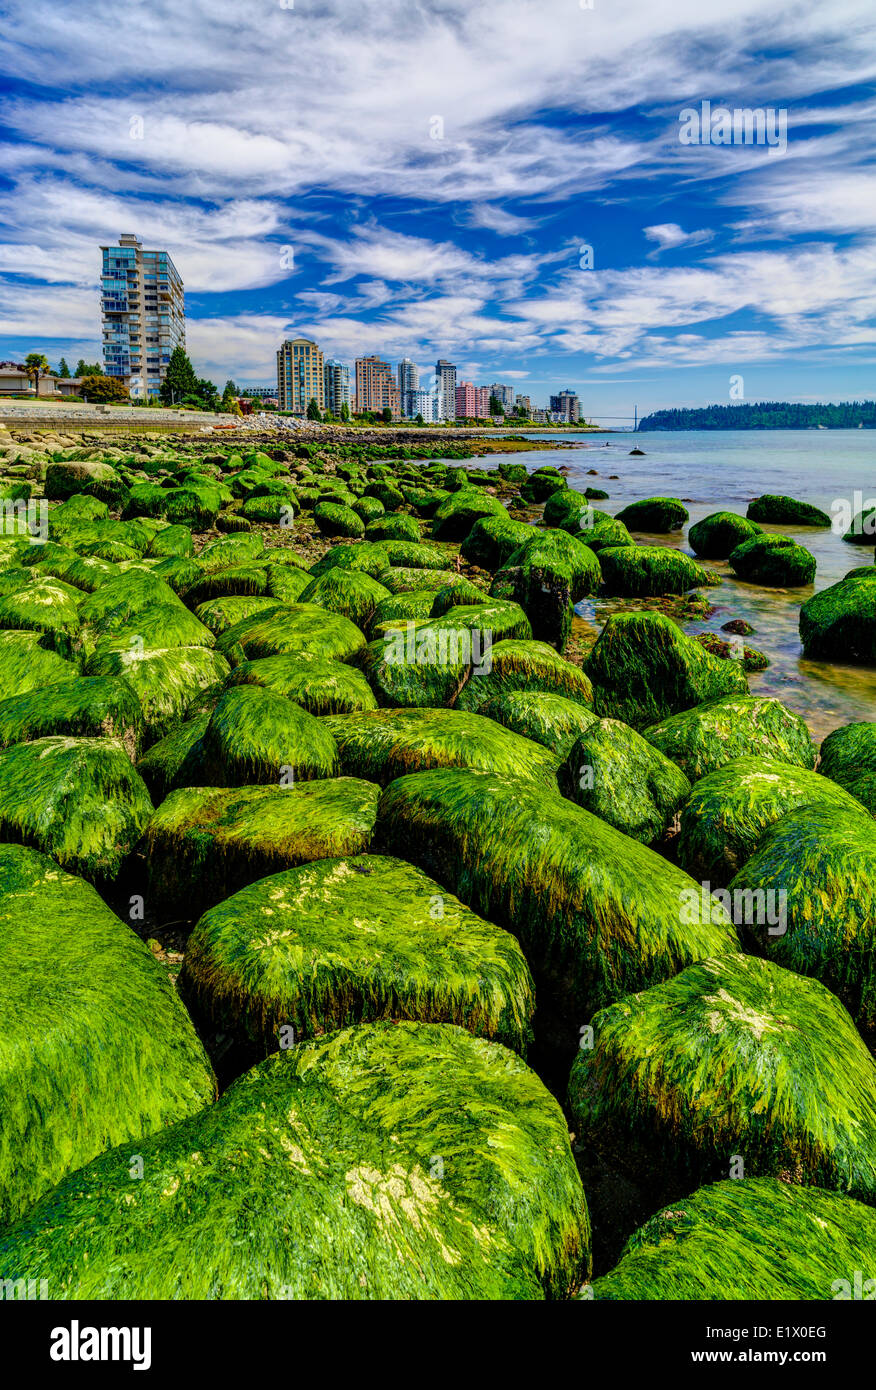 Seaweed covered boulders at Dundarave beach, West Vancouver, British Columbia, Canada Stock Photo